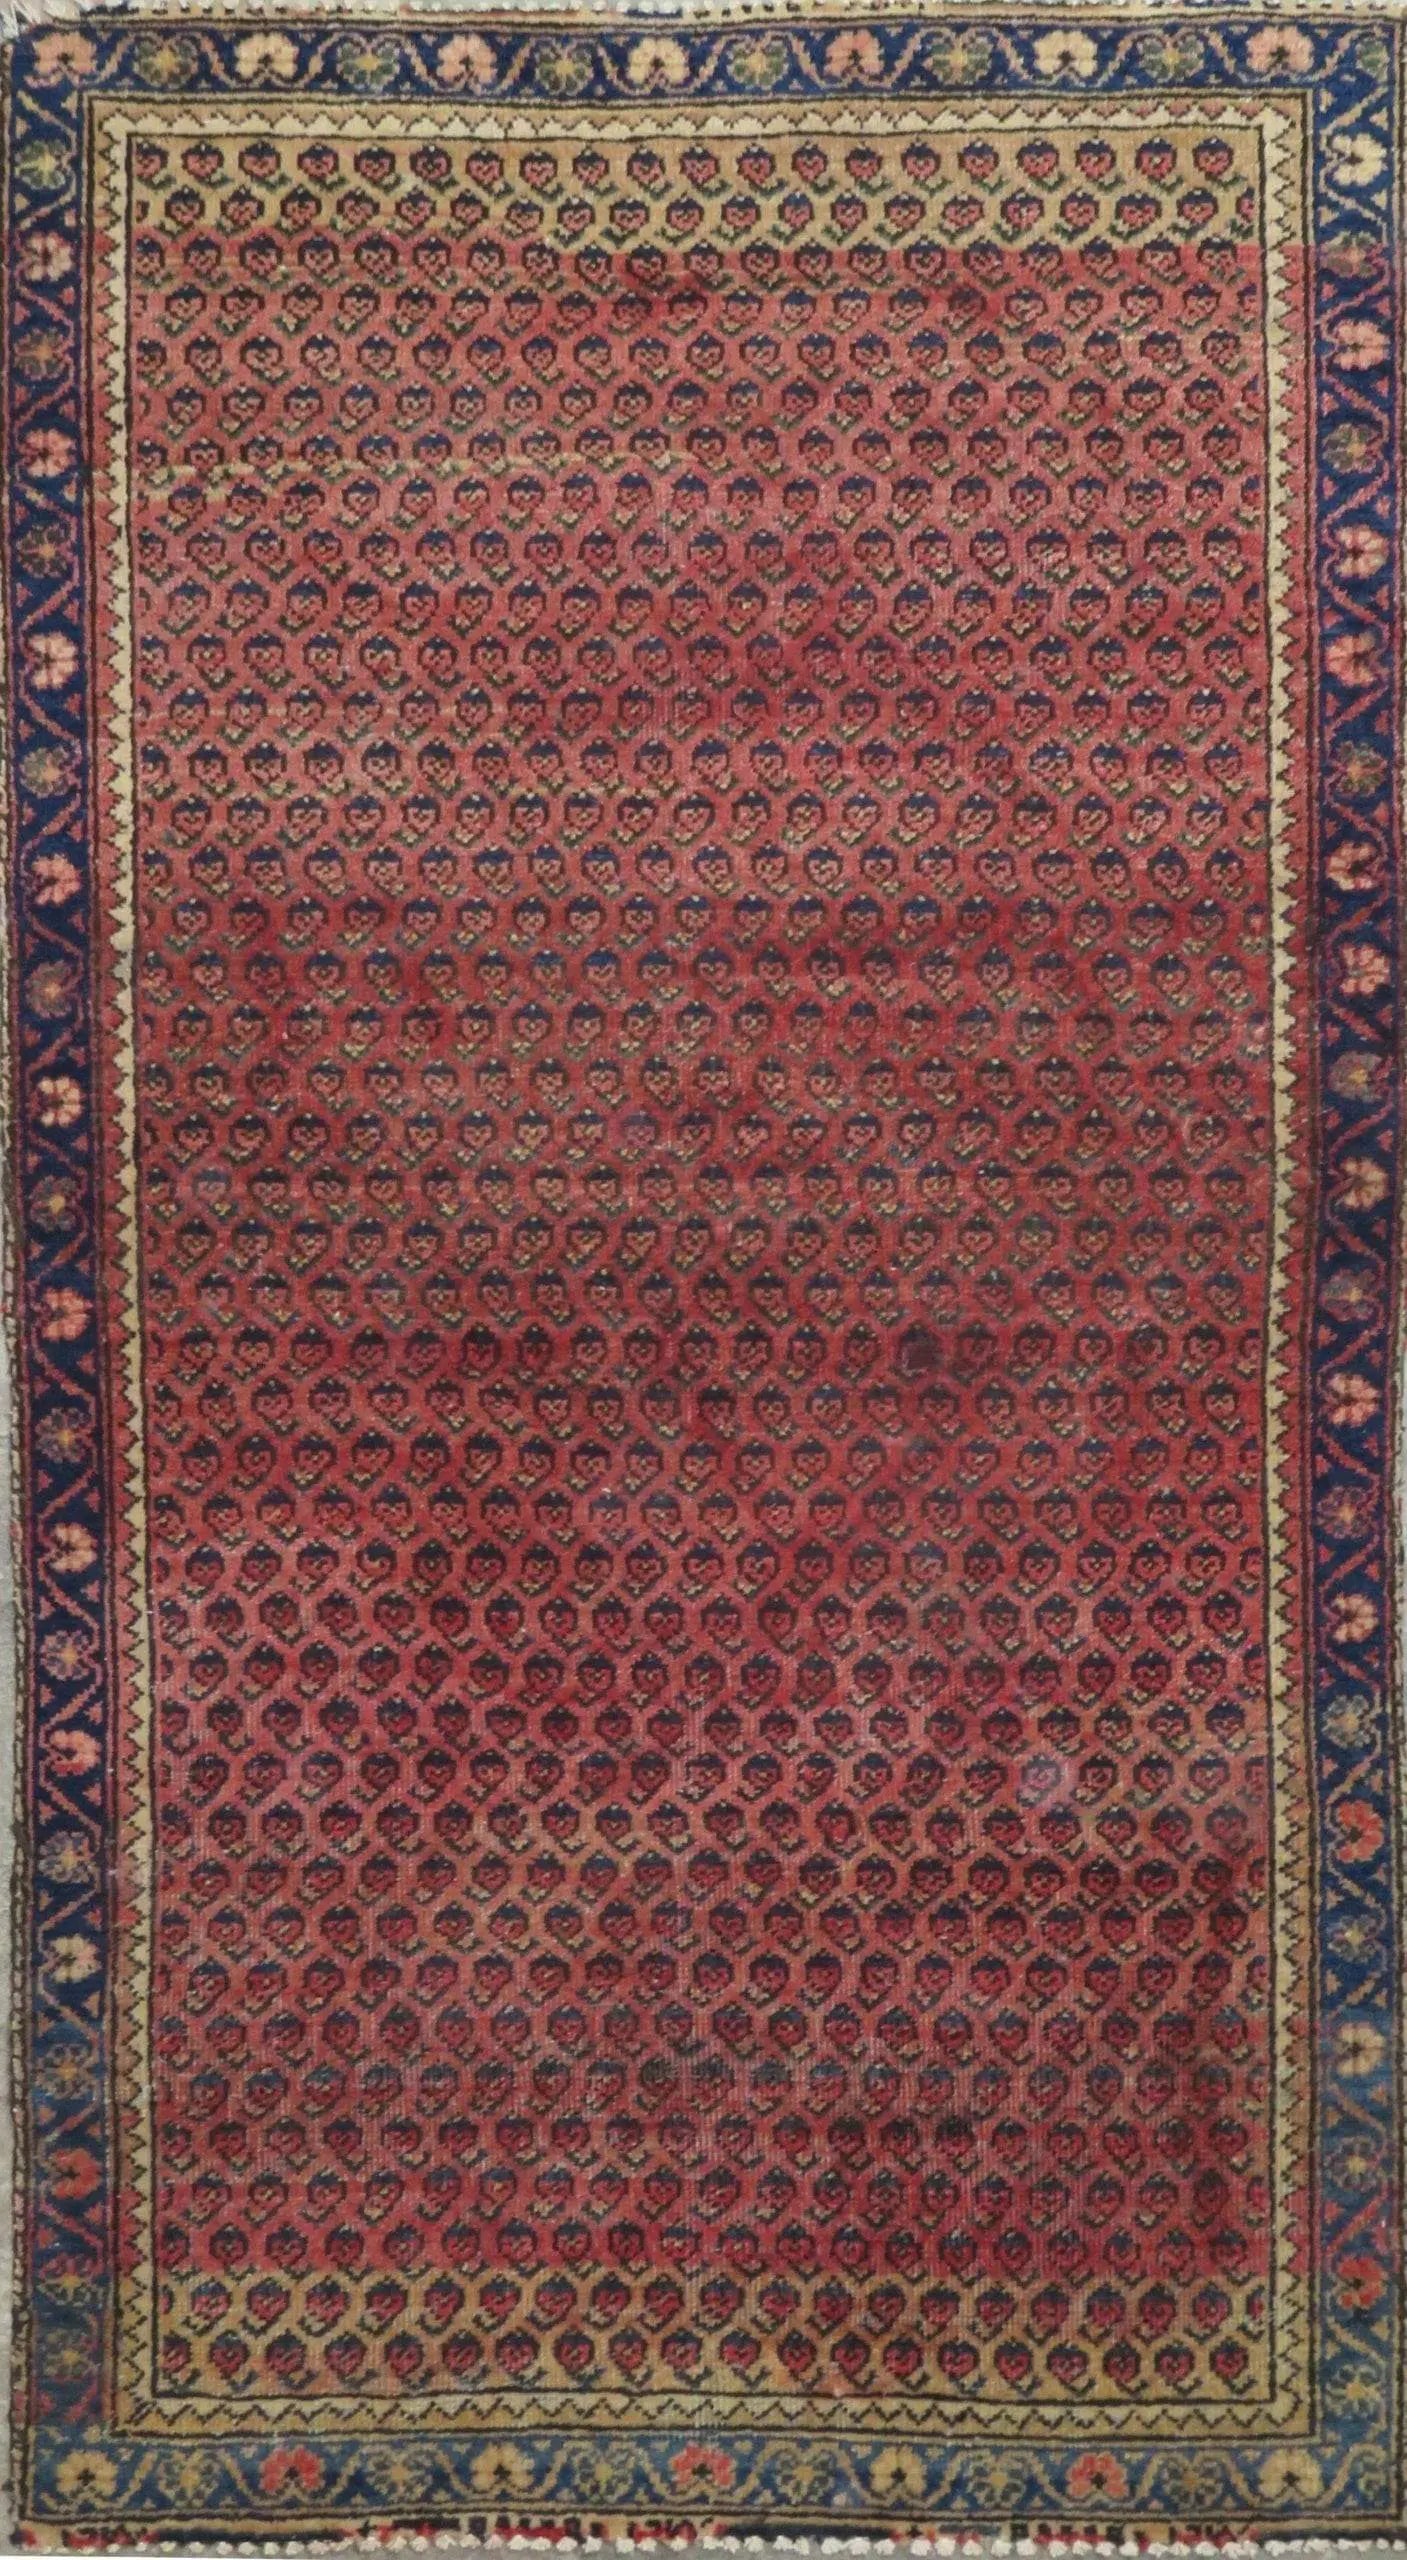 Hand-Knotted Vintage Rug 5'8" x 3'1"